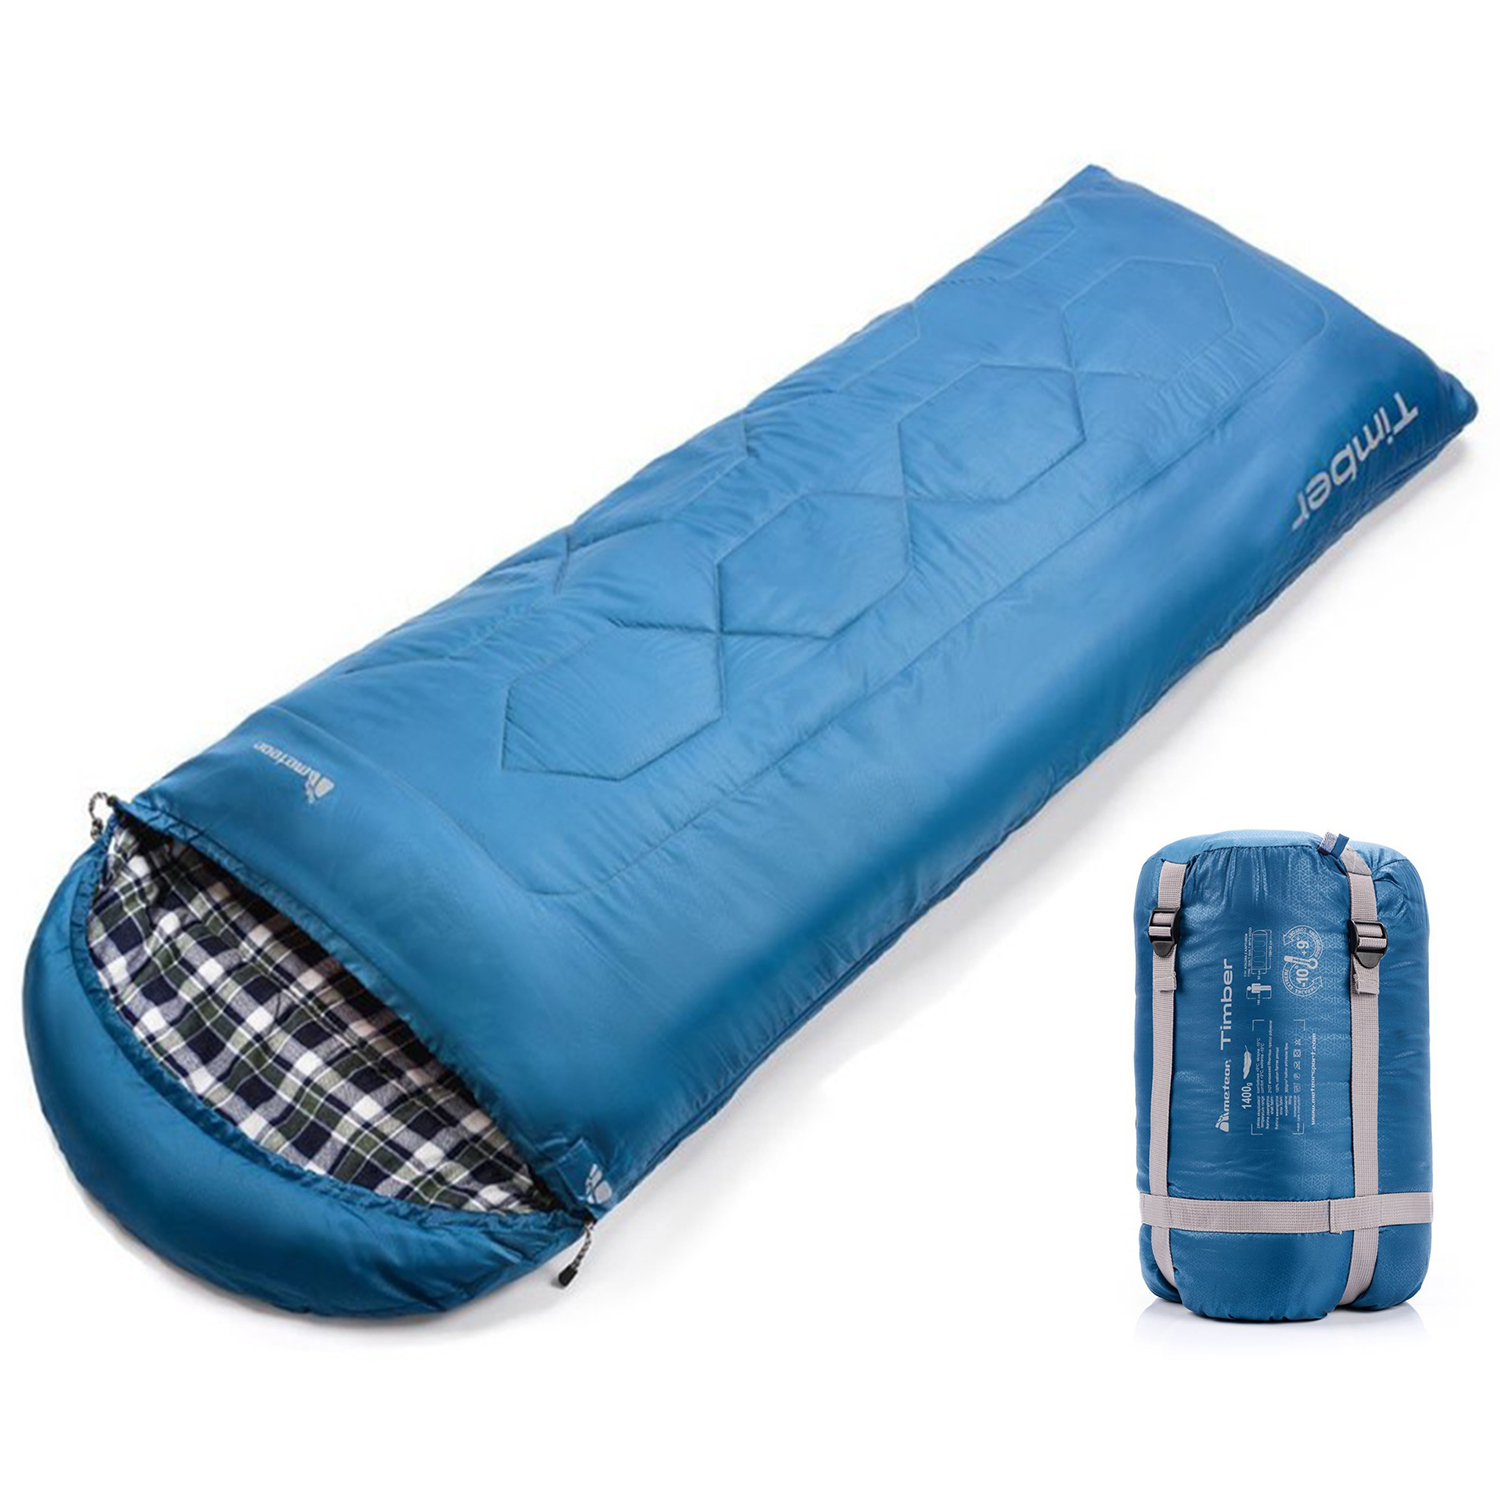 Buy QUECHUA FORCLAZ 0° Helium Online at Low Prices in India - Amazon.in